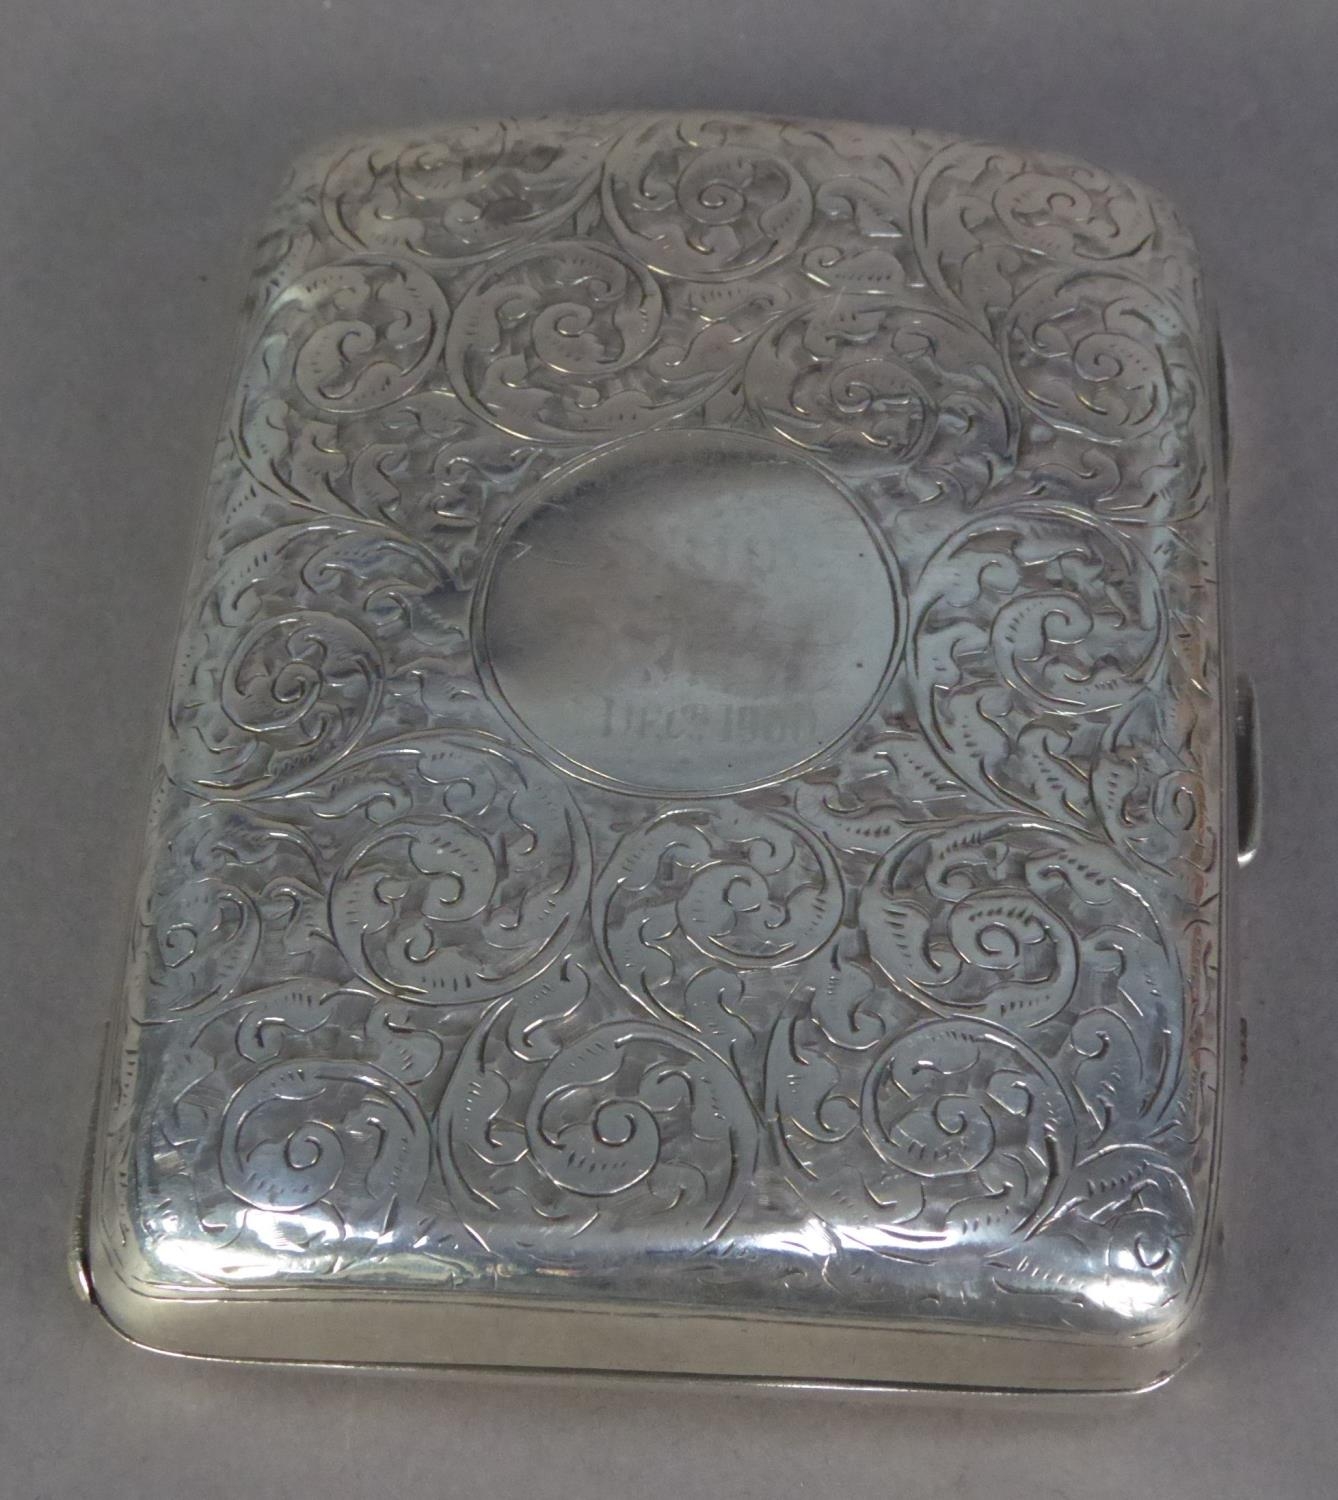 VICTORIAN ENGRAVED SILVER POCKET CIGARETTE CASE, of curved oblong form with foliate scroll work